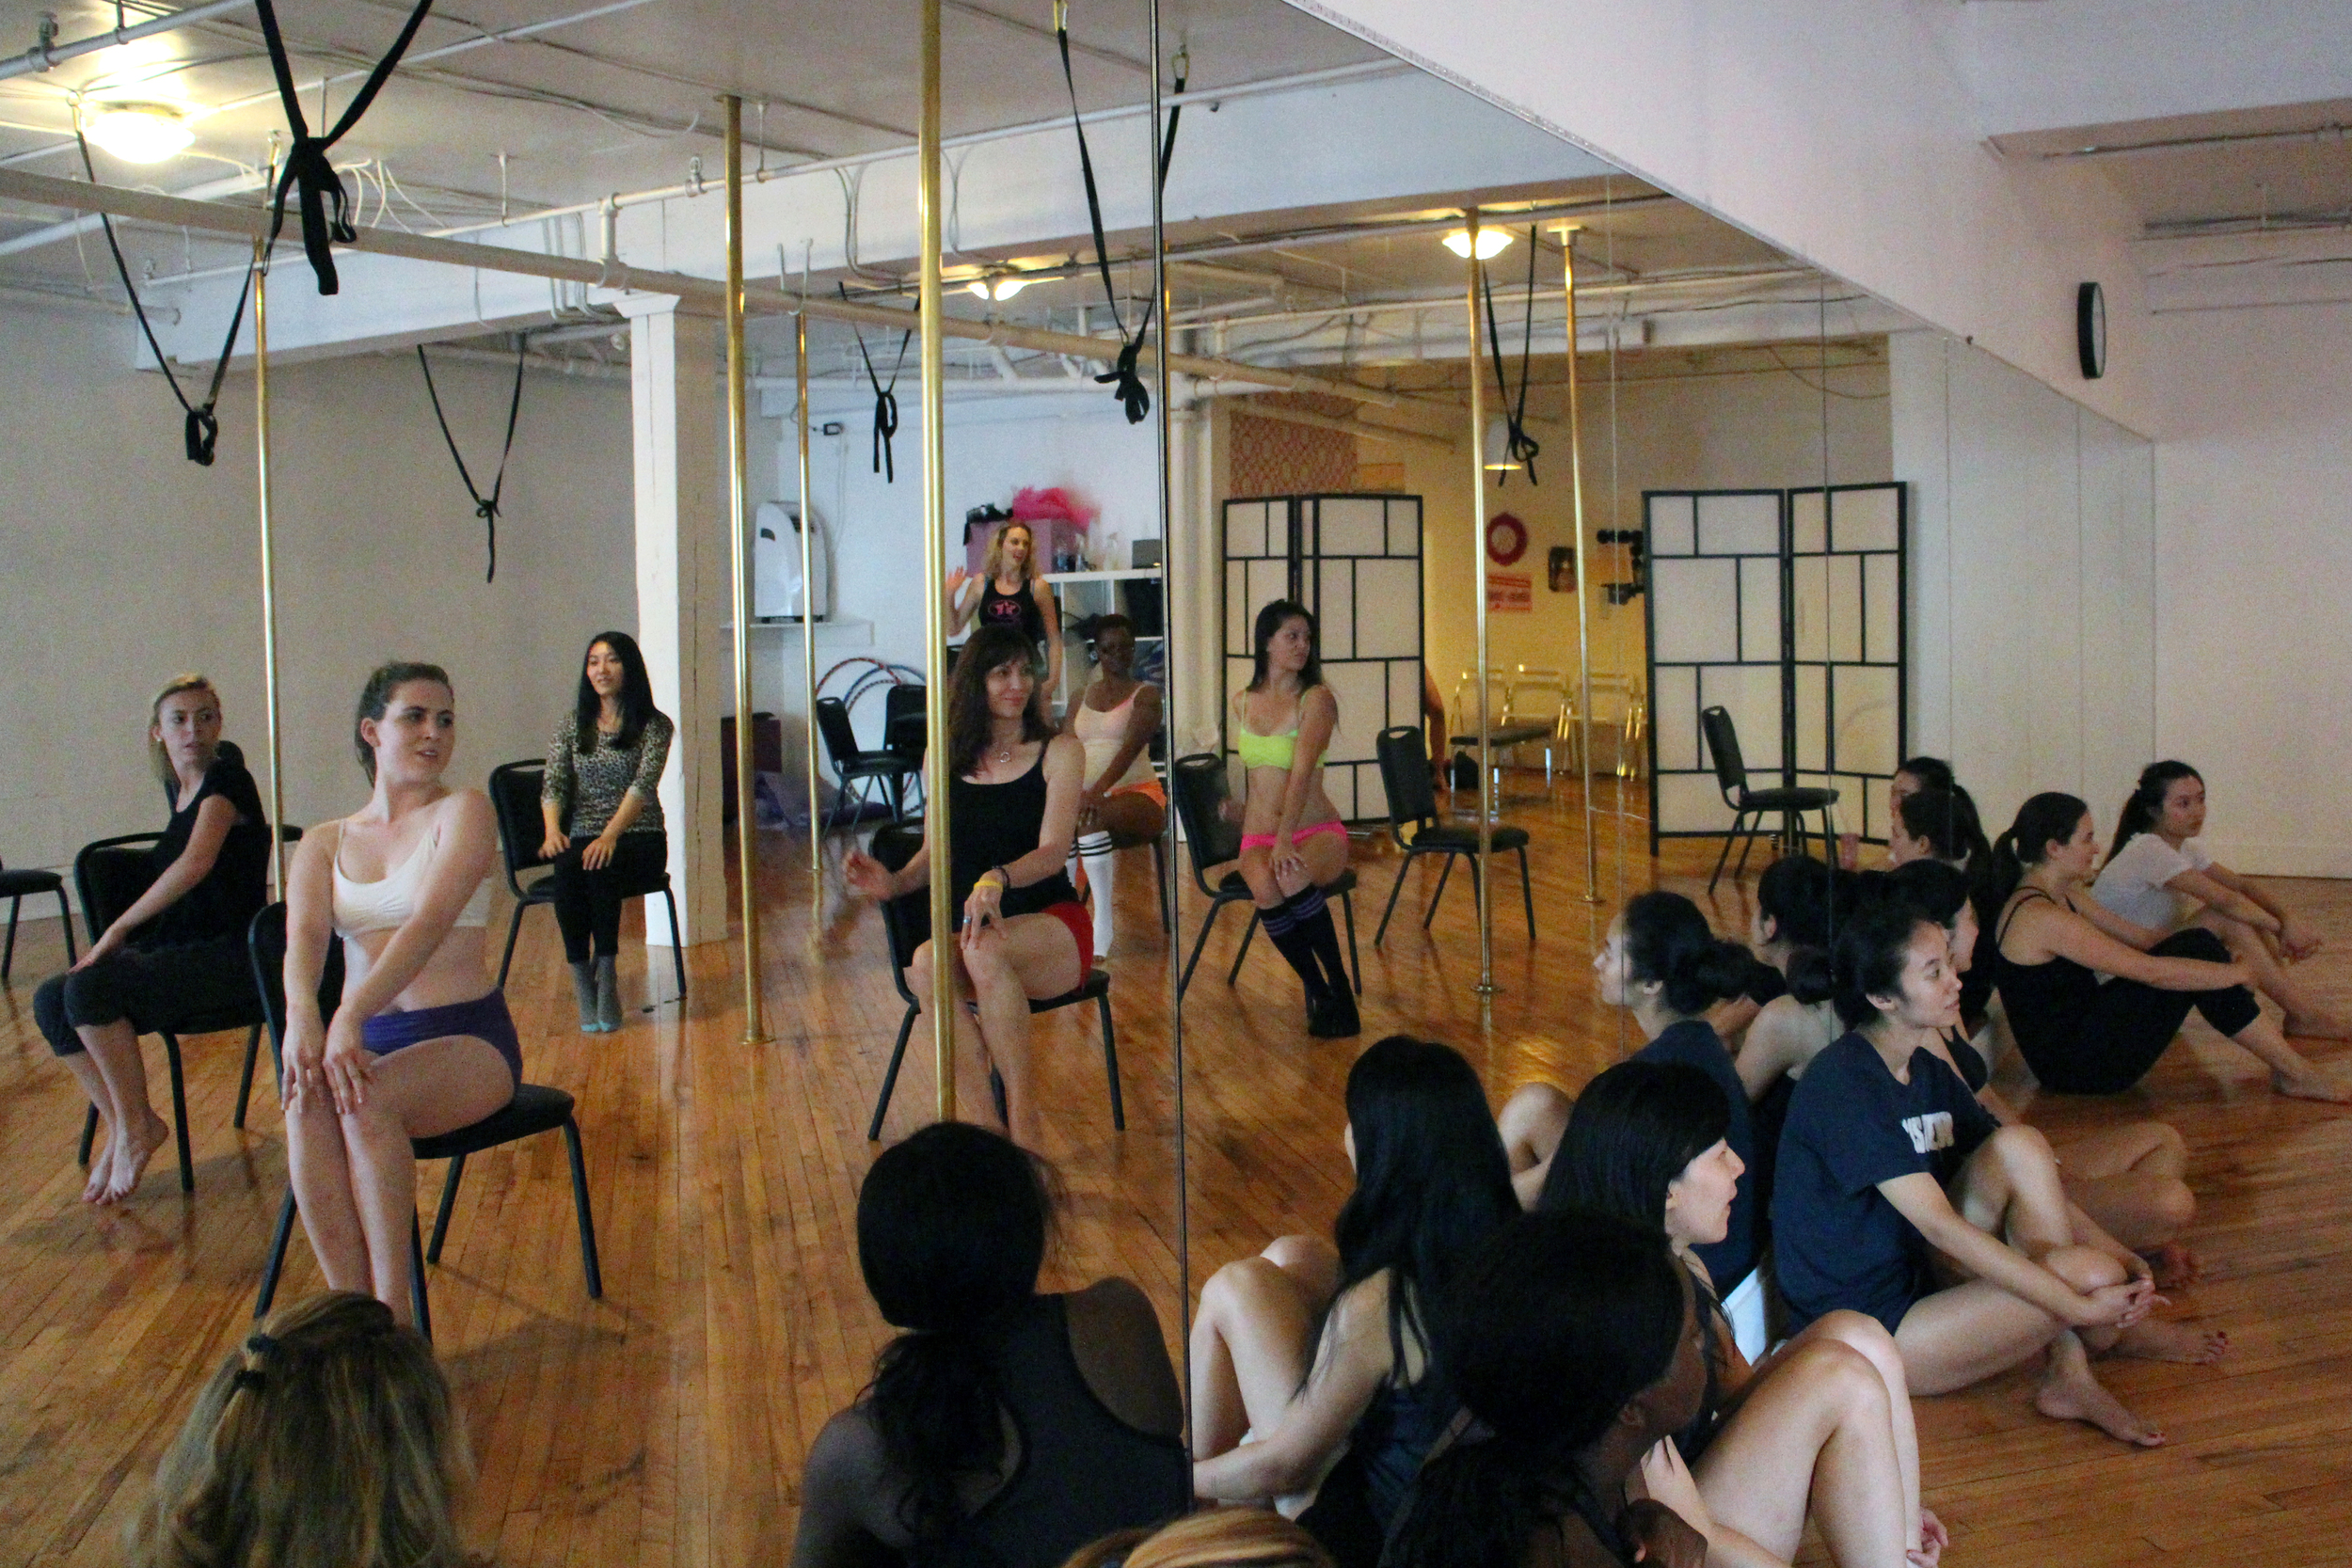 The Brass Barre - POLE SASS & A$$ Learn to wiggle and